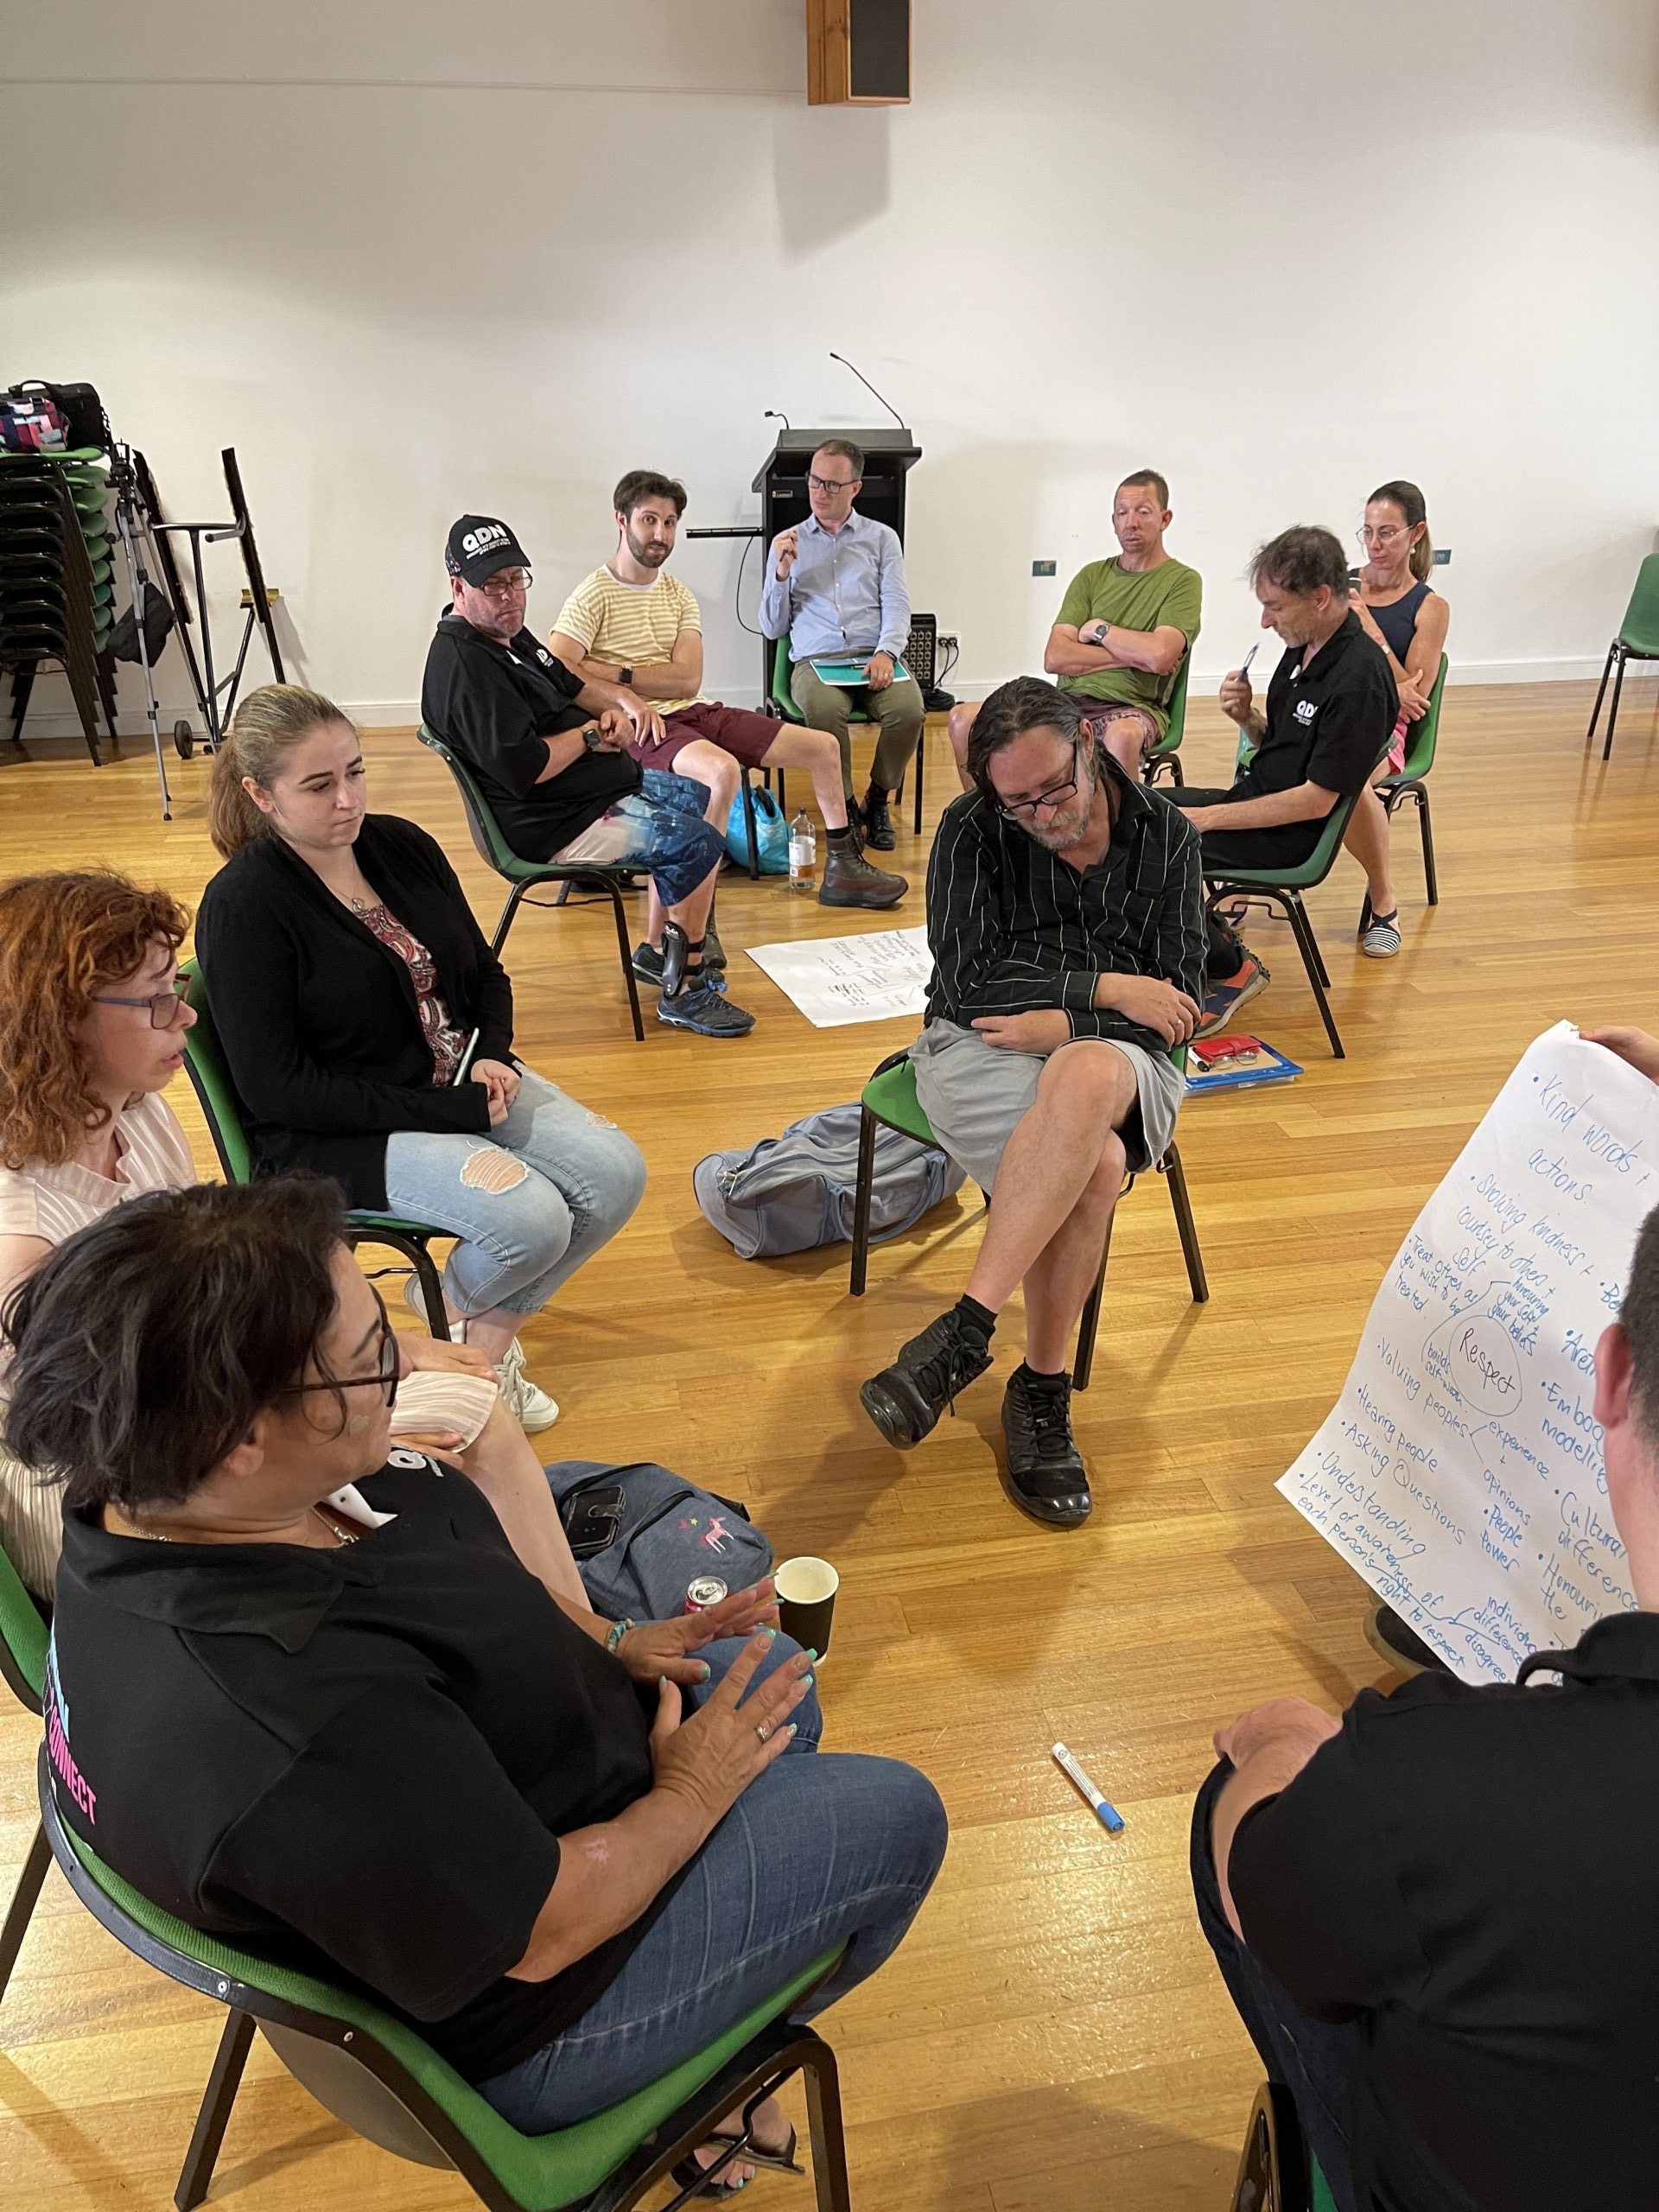 Two groups of people sitting on chairs in two circles. They are having a discussion.